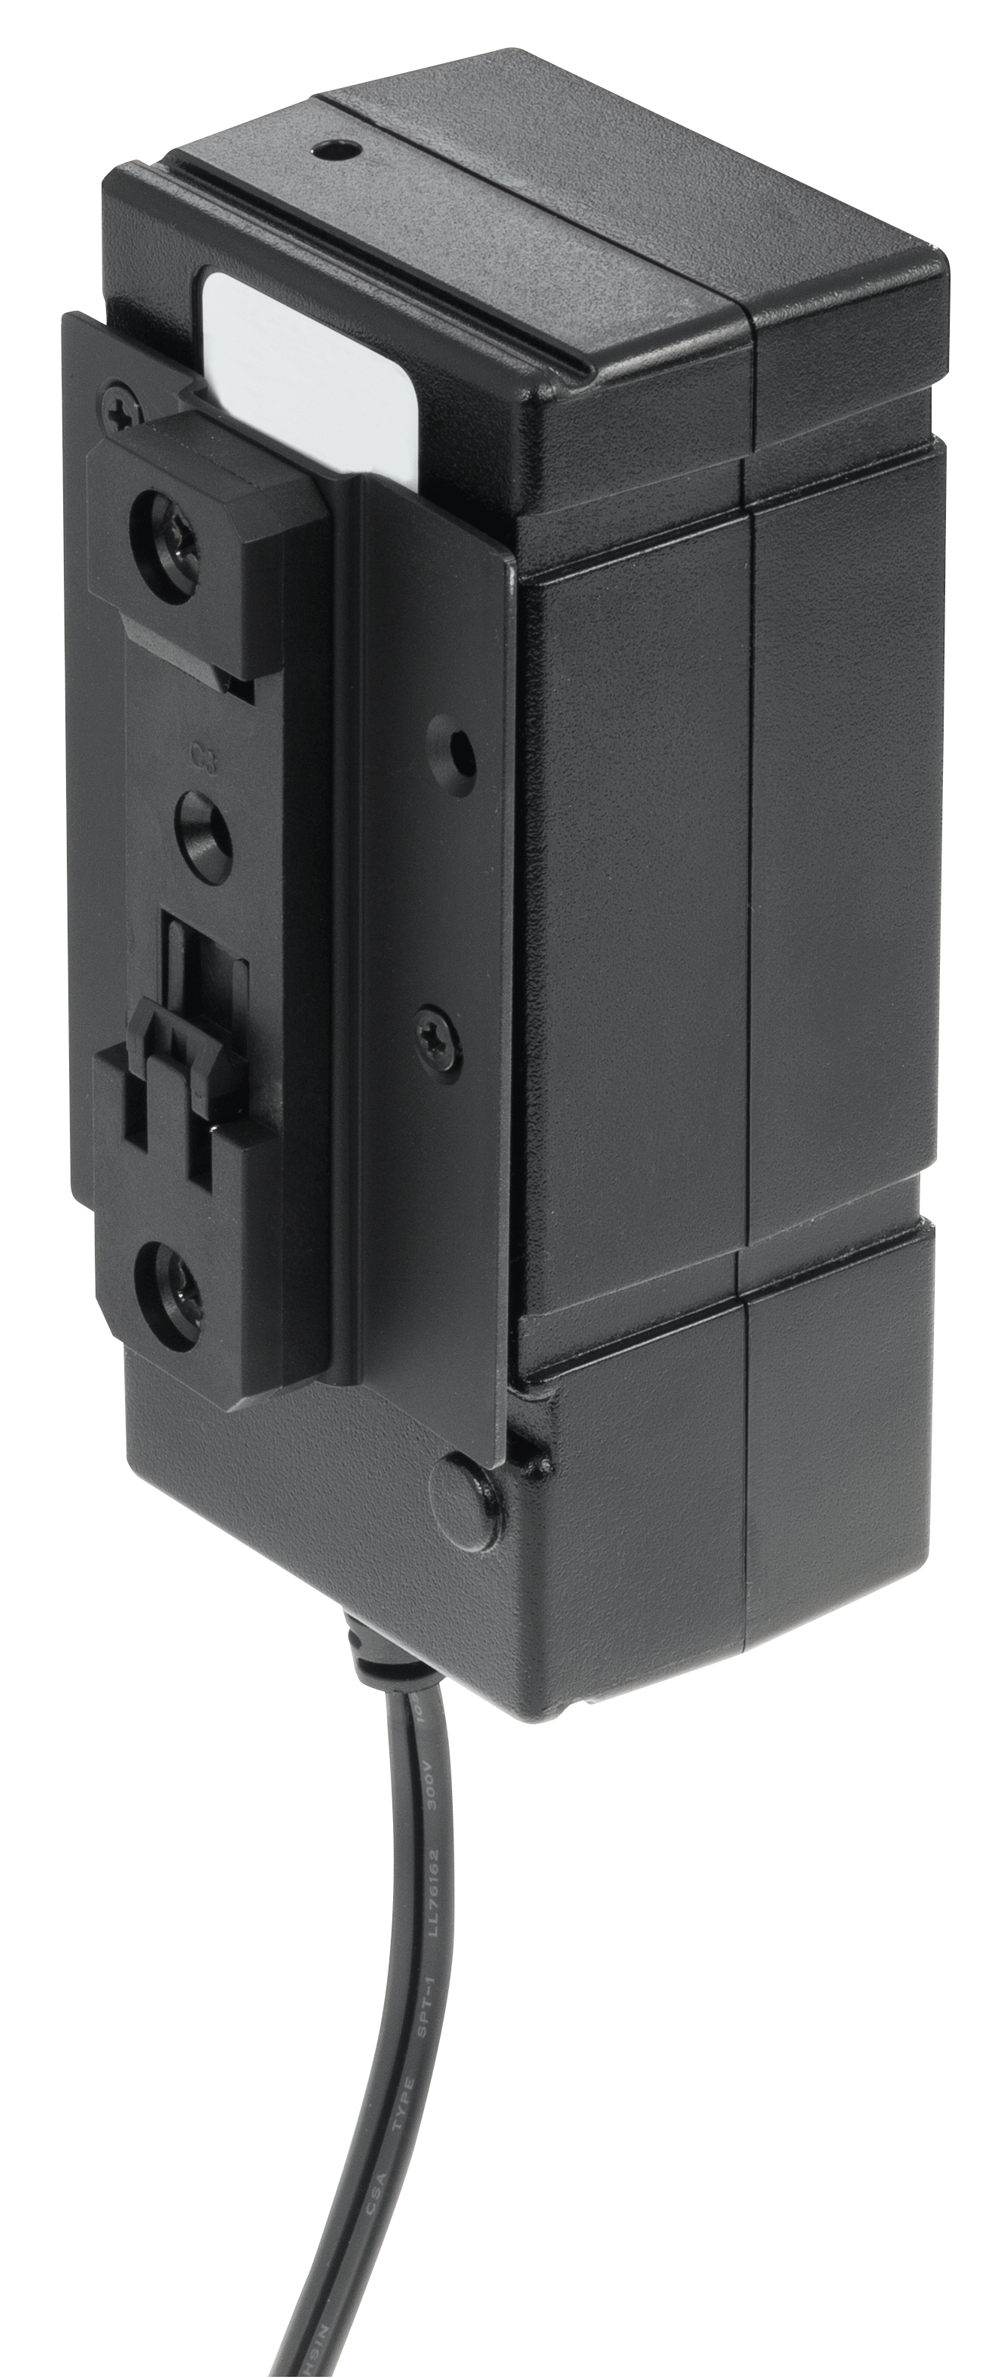 The PS 18DR enables a power supply to be securely mounted to an industry-standard DIN rail